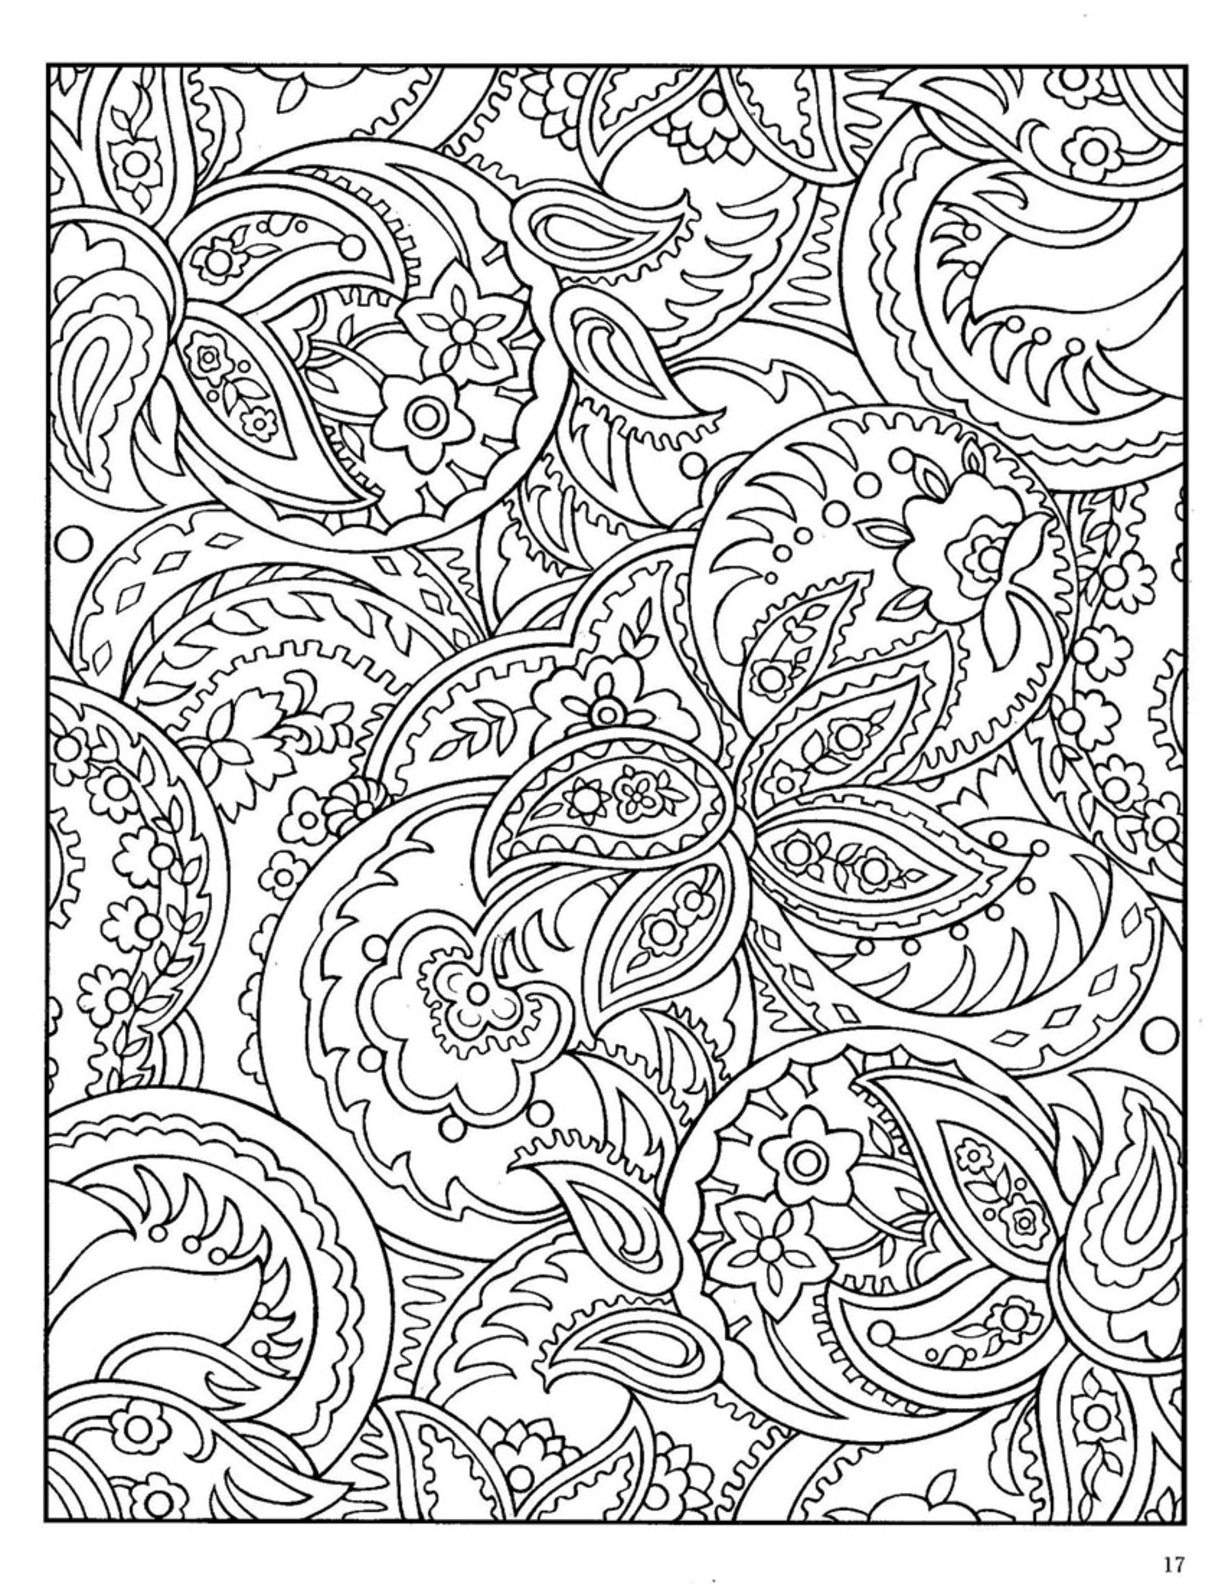 Paisley Design Coloring Pages for Adults Image